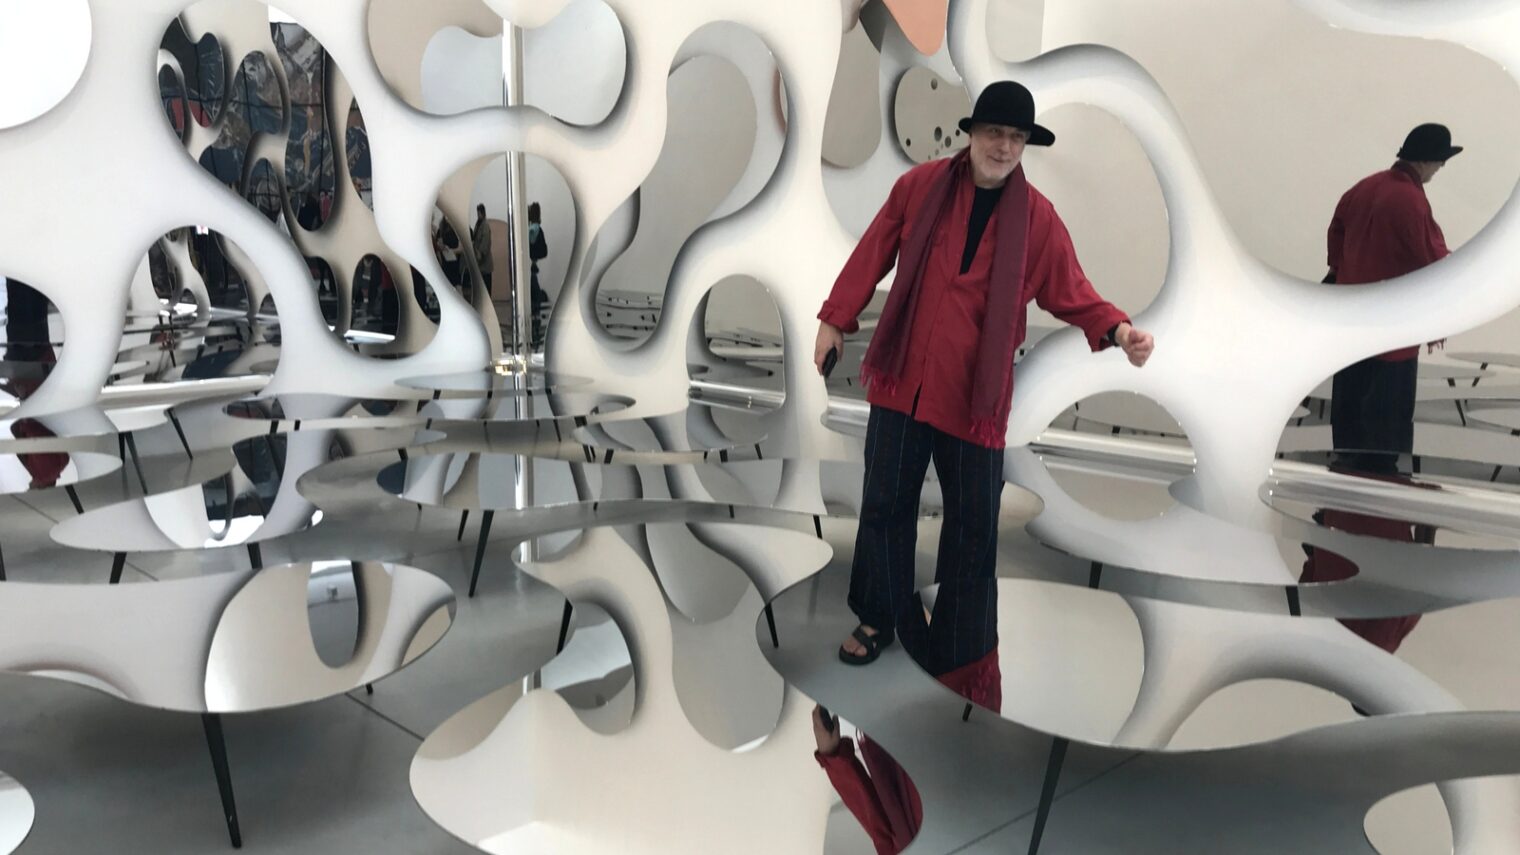 Ron Arad’s “All and Nothing” exhibition at Gordon Gallery in Tel Aviv. Photo by Rebecca Stadlen Amir